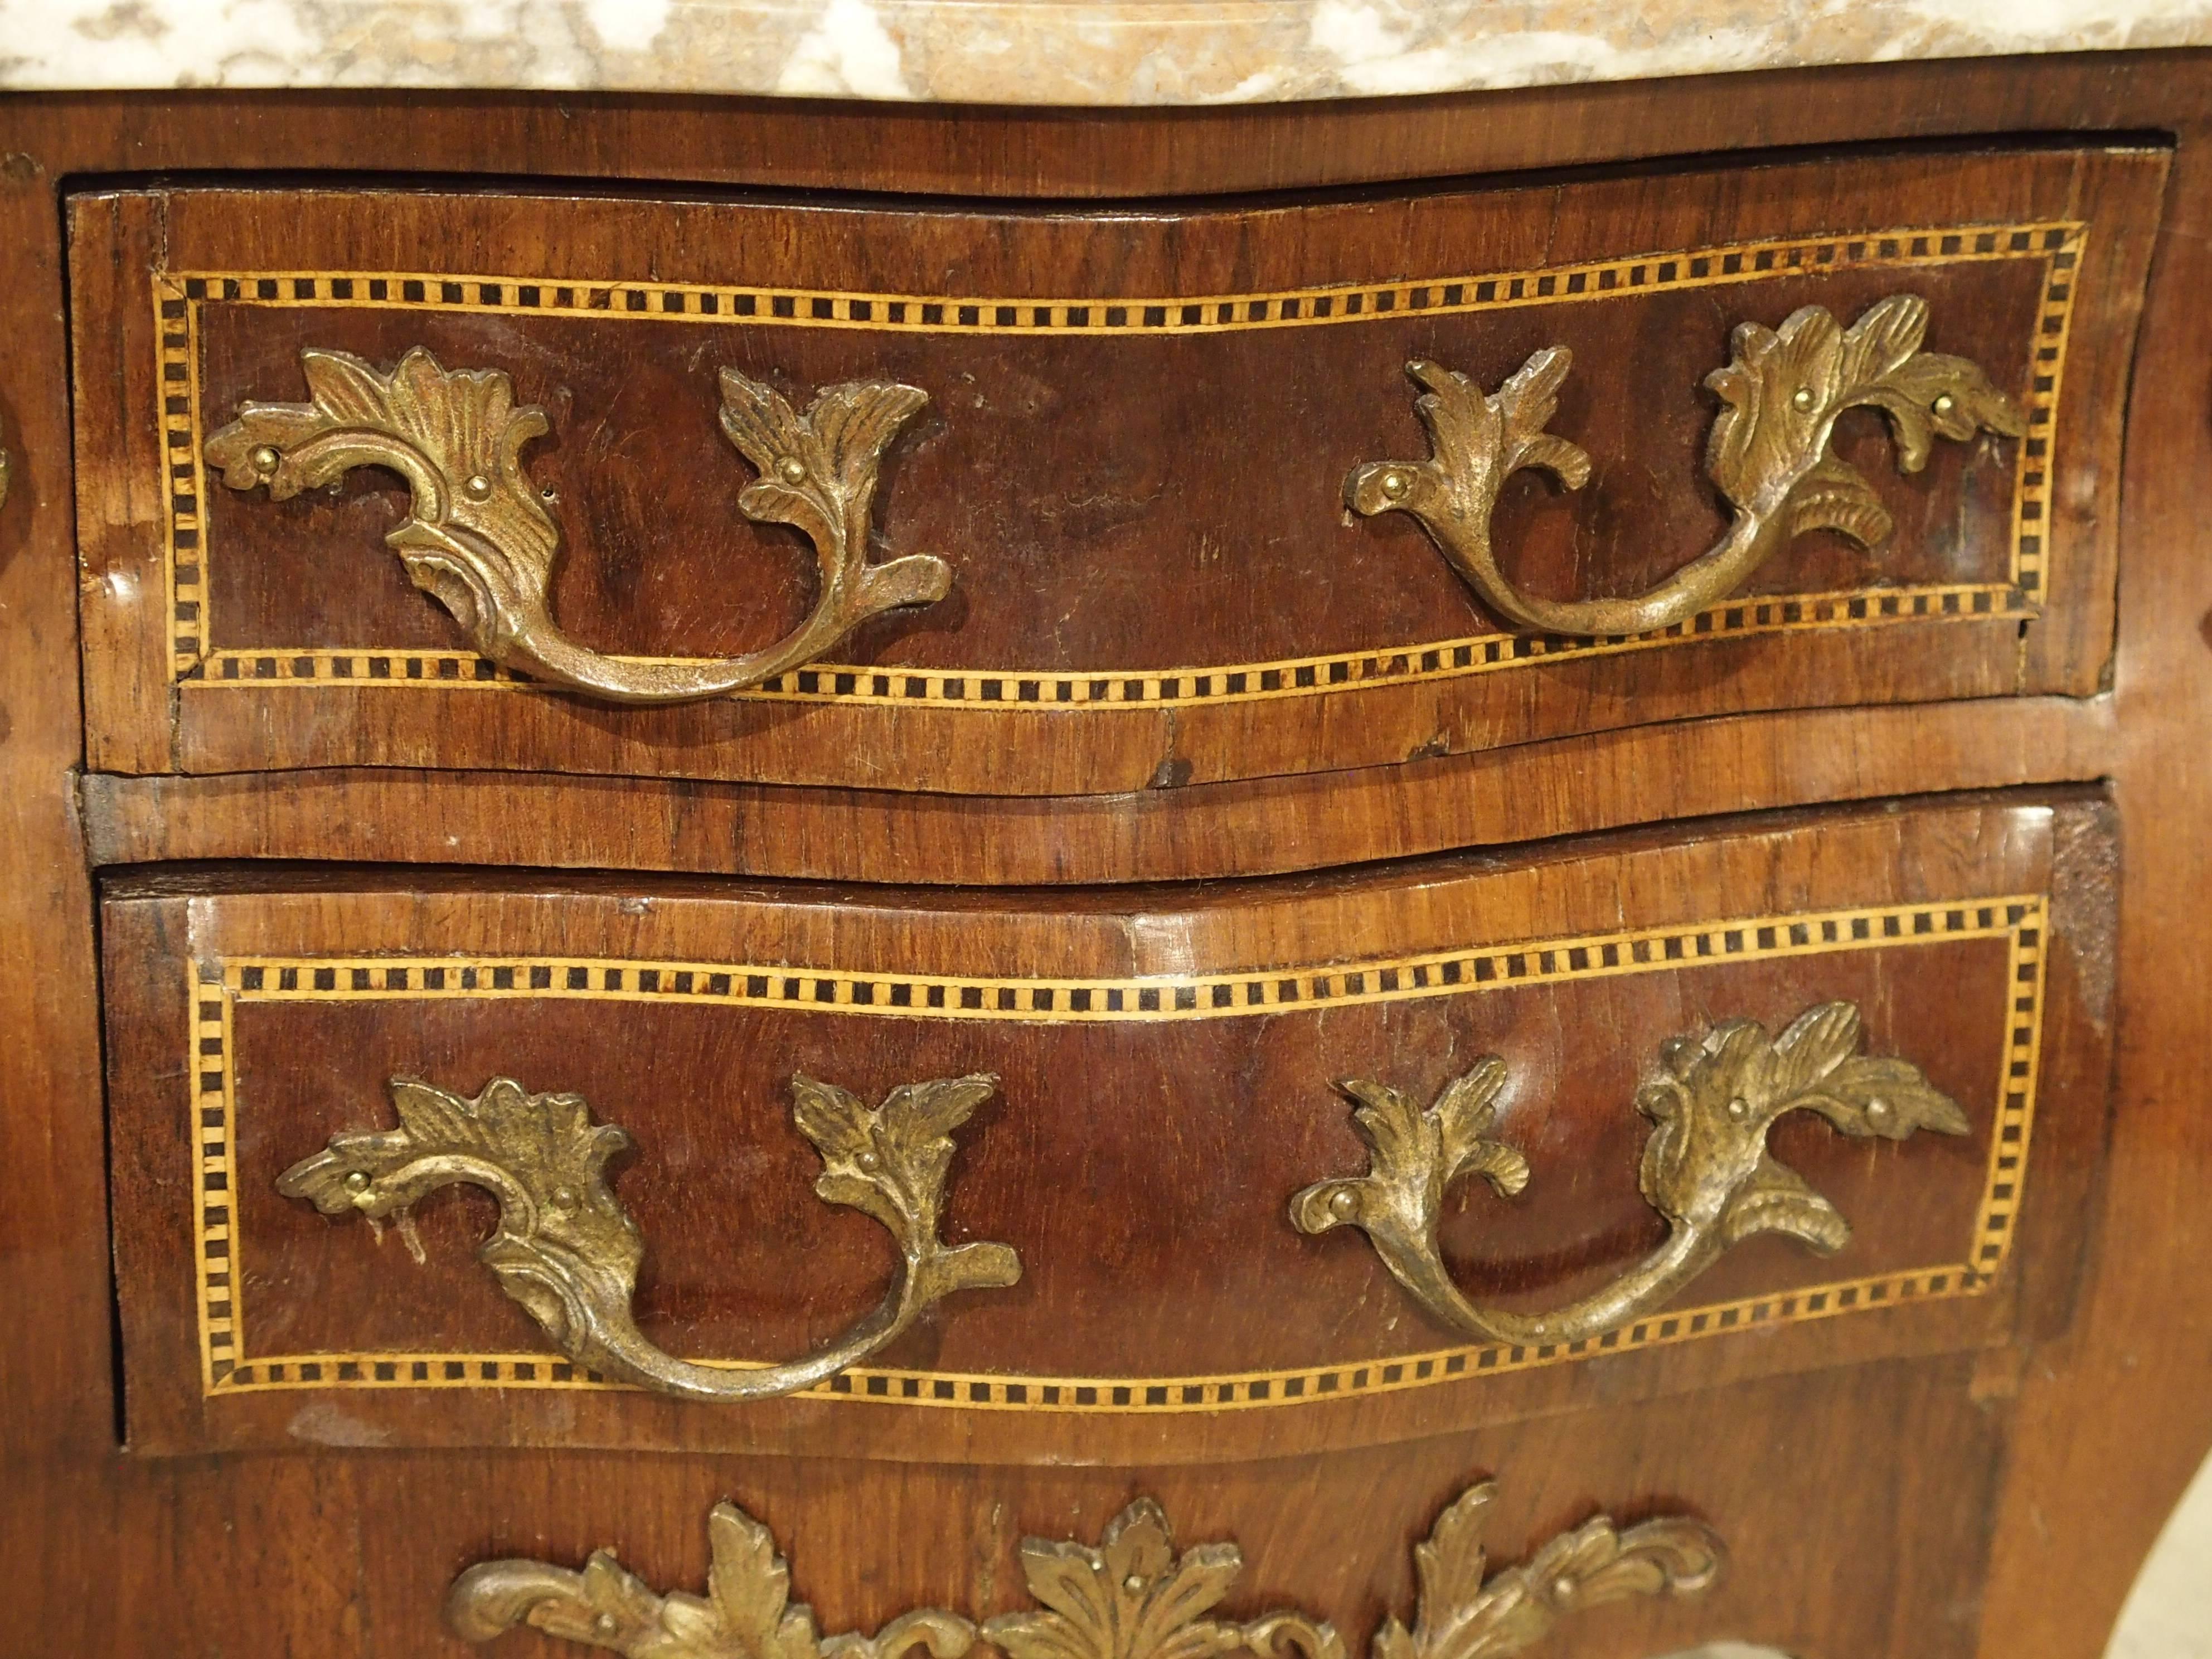 Cast Miniature Antique Chest of Drawers from France, circa 1880